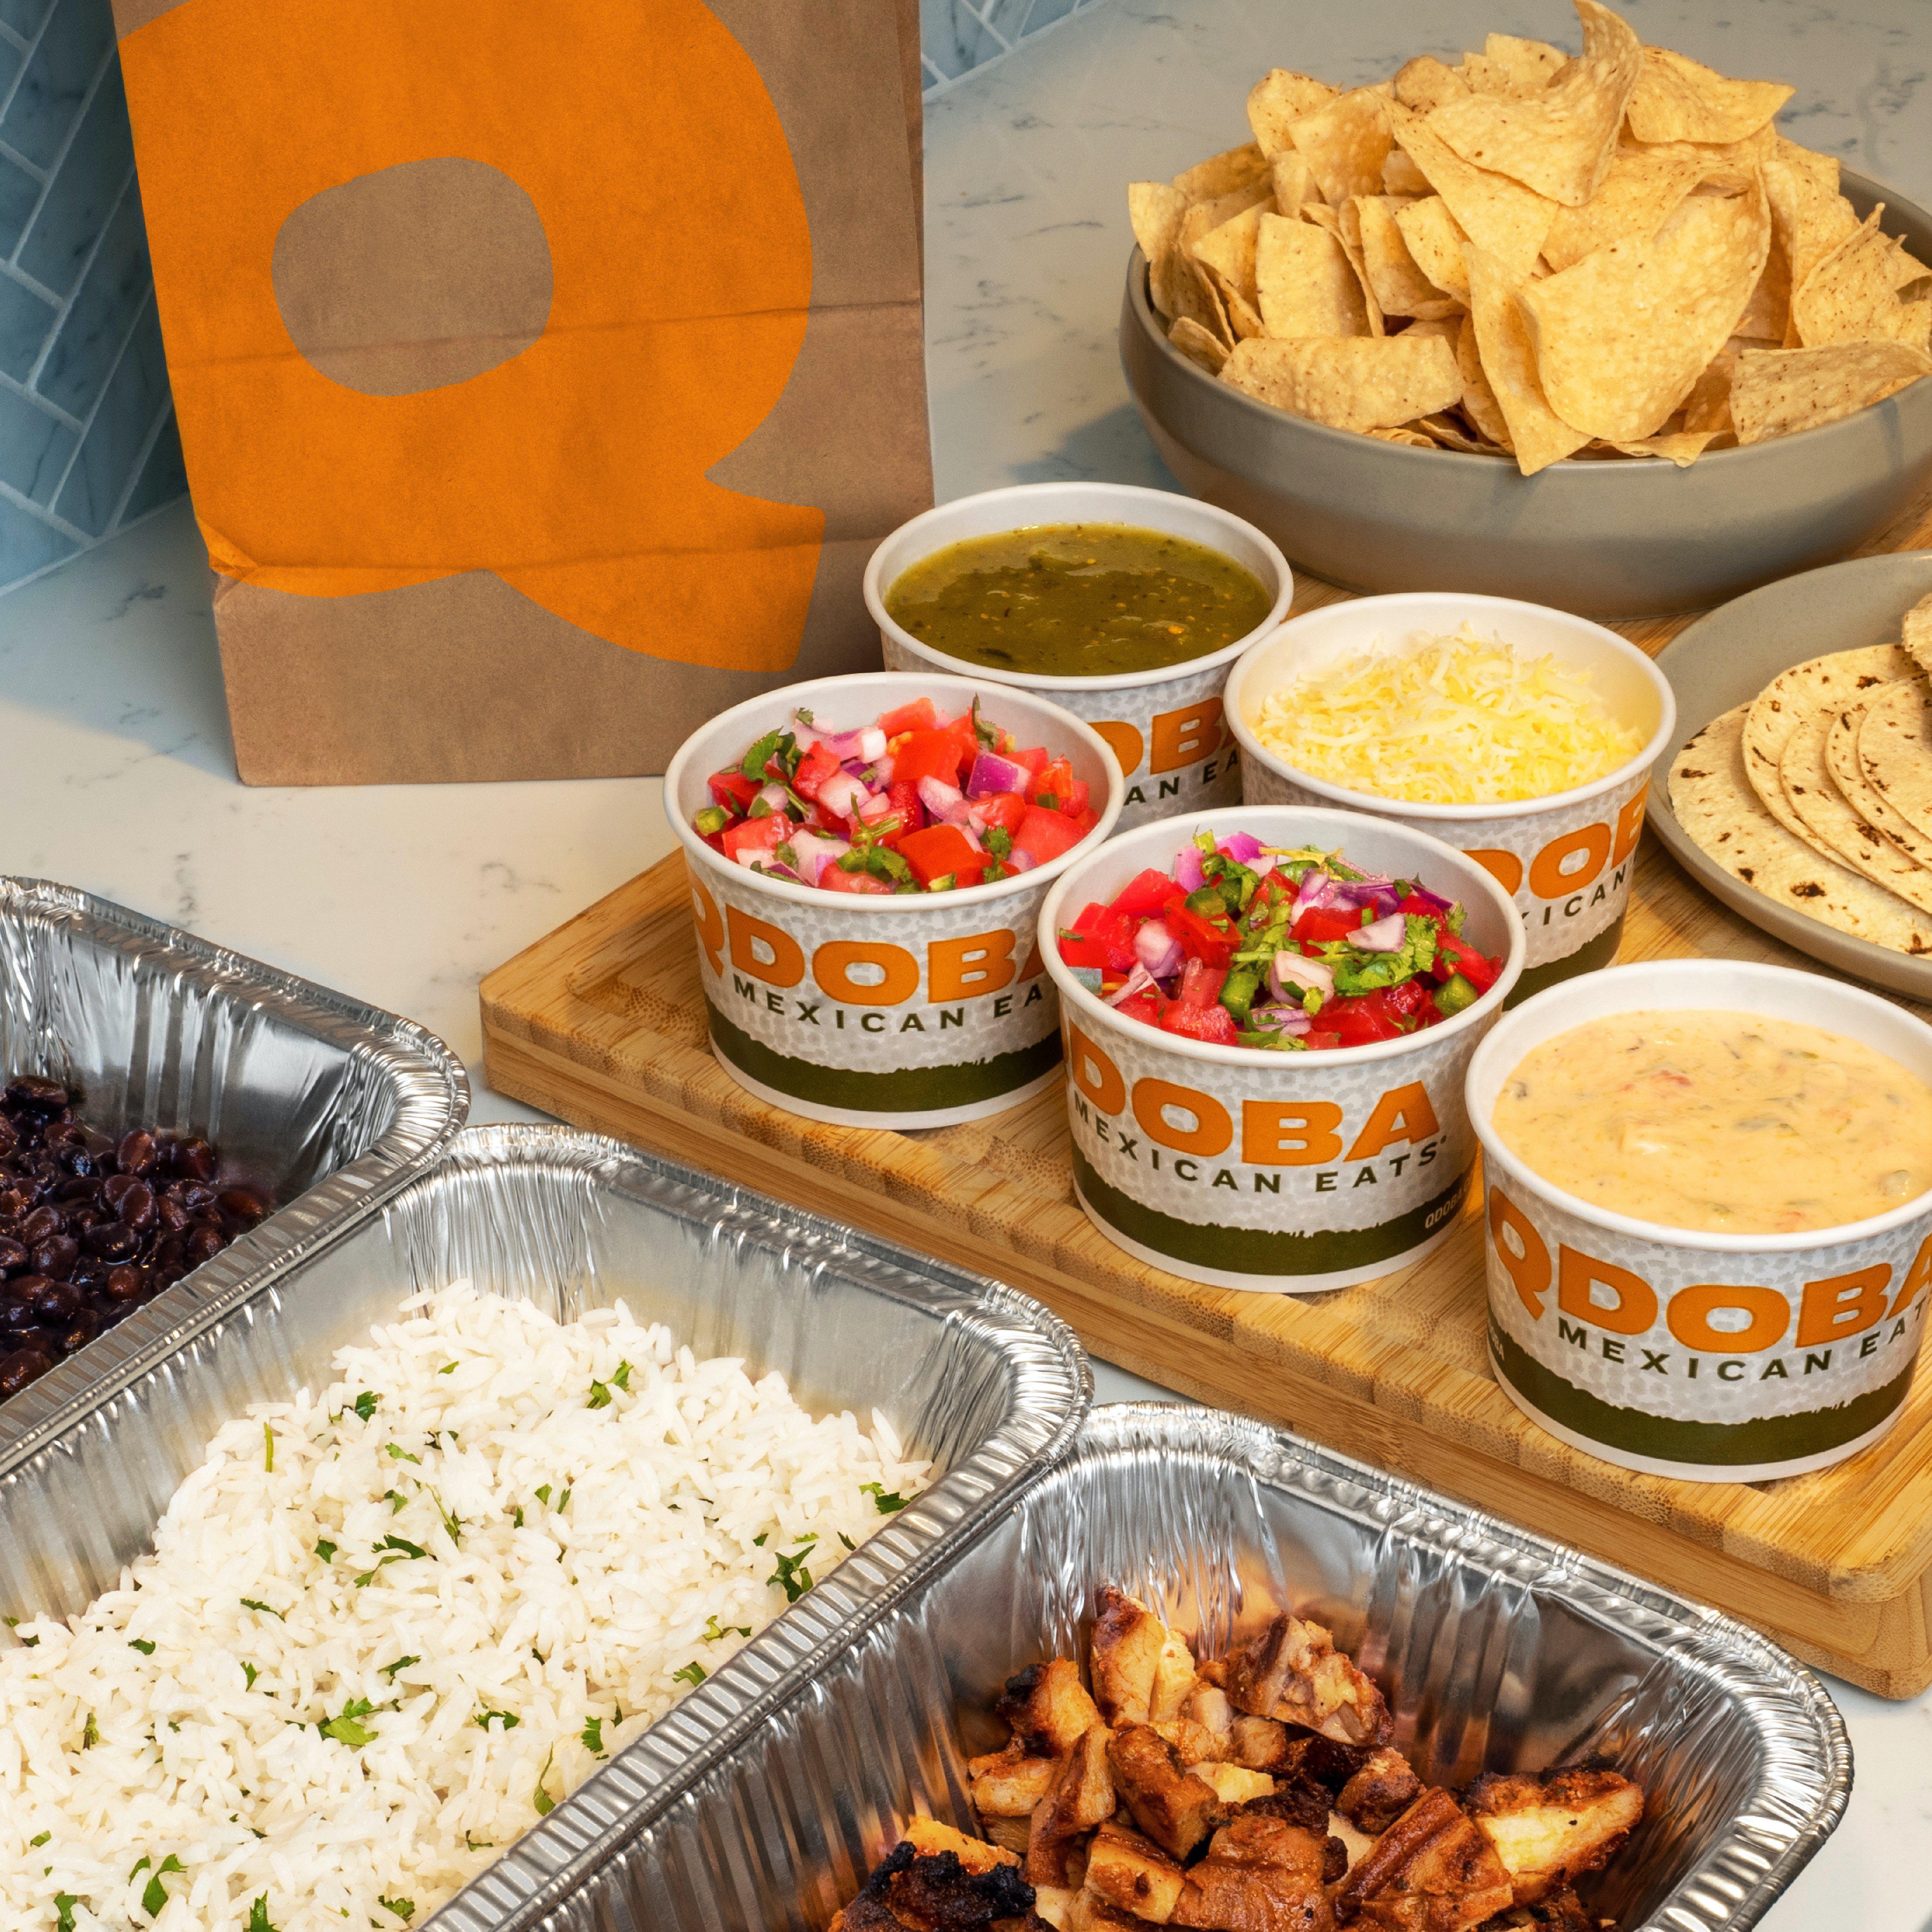 Family Meals come with all of the fixings to make flavorful tacos or bowls for 4-5 people.